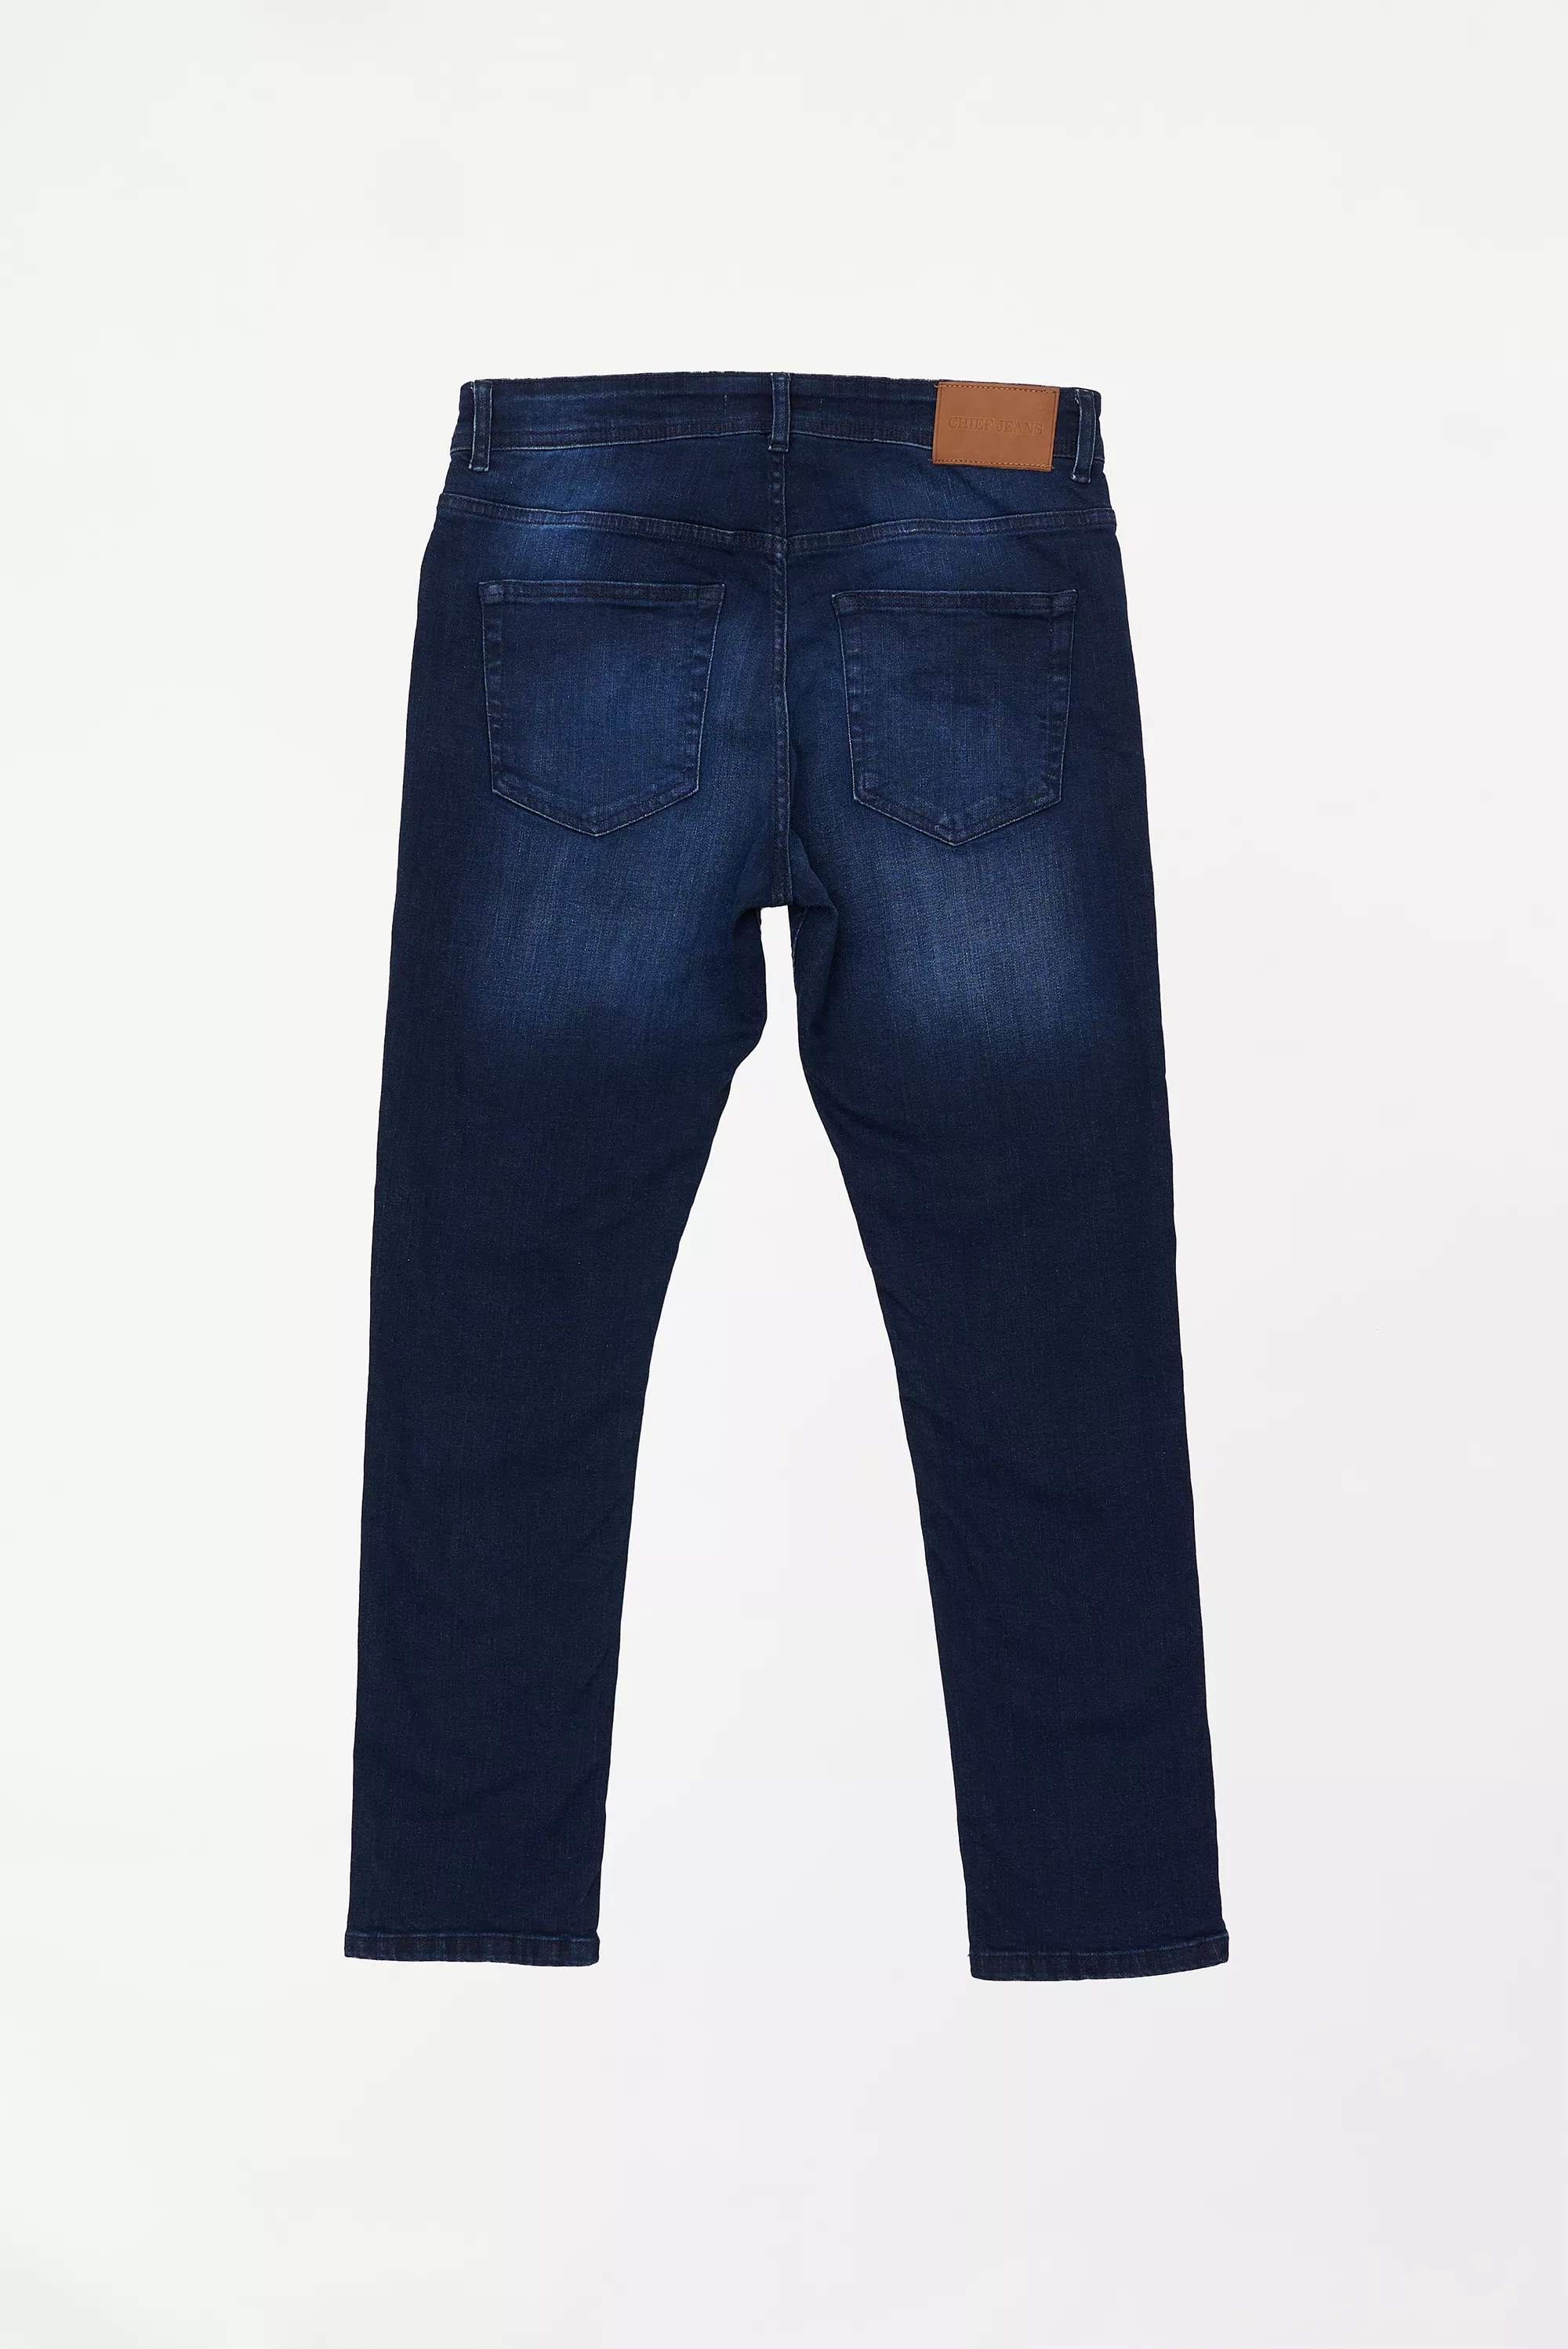 Men's Faded Tapered Fit Blue Jeans